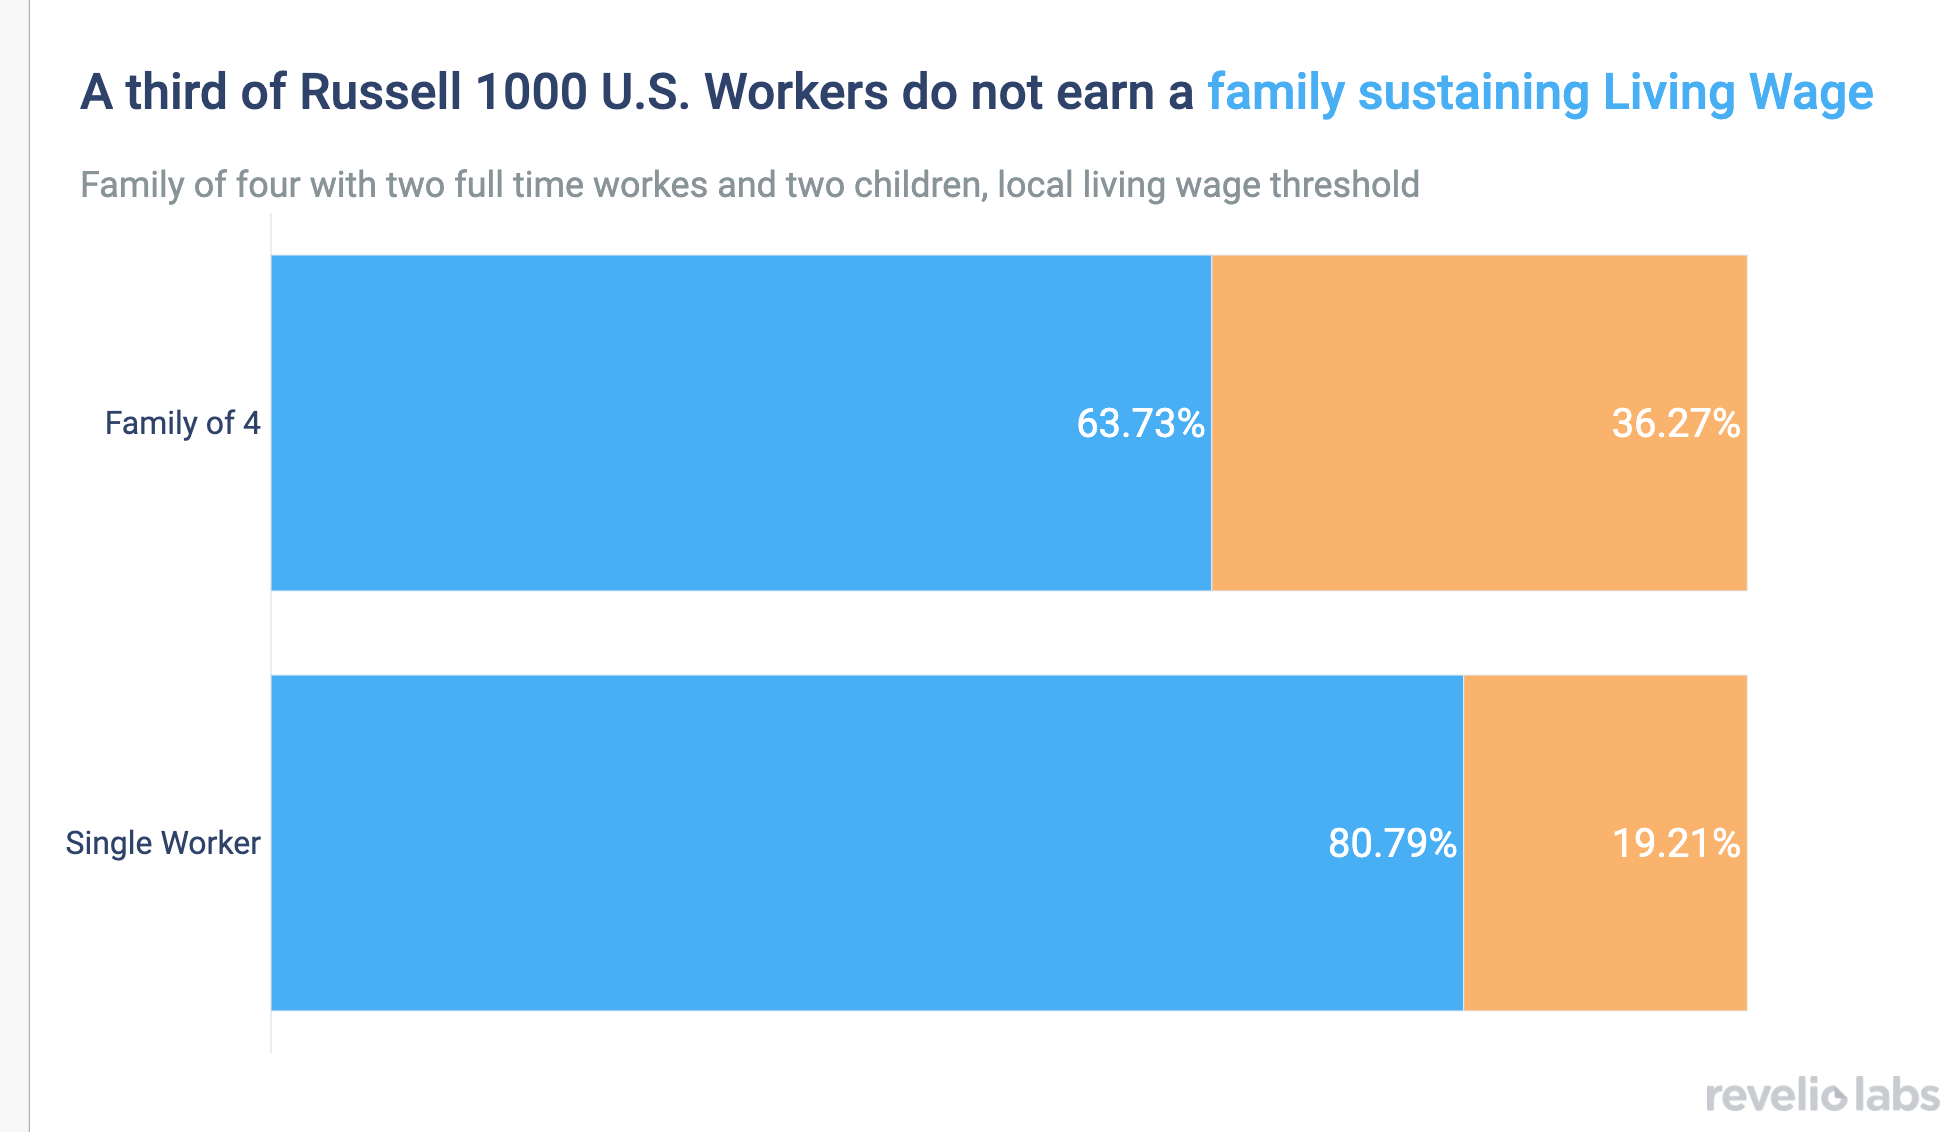 Share earning a living wage